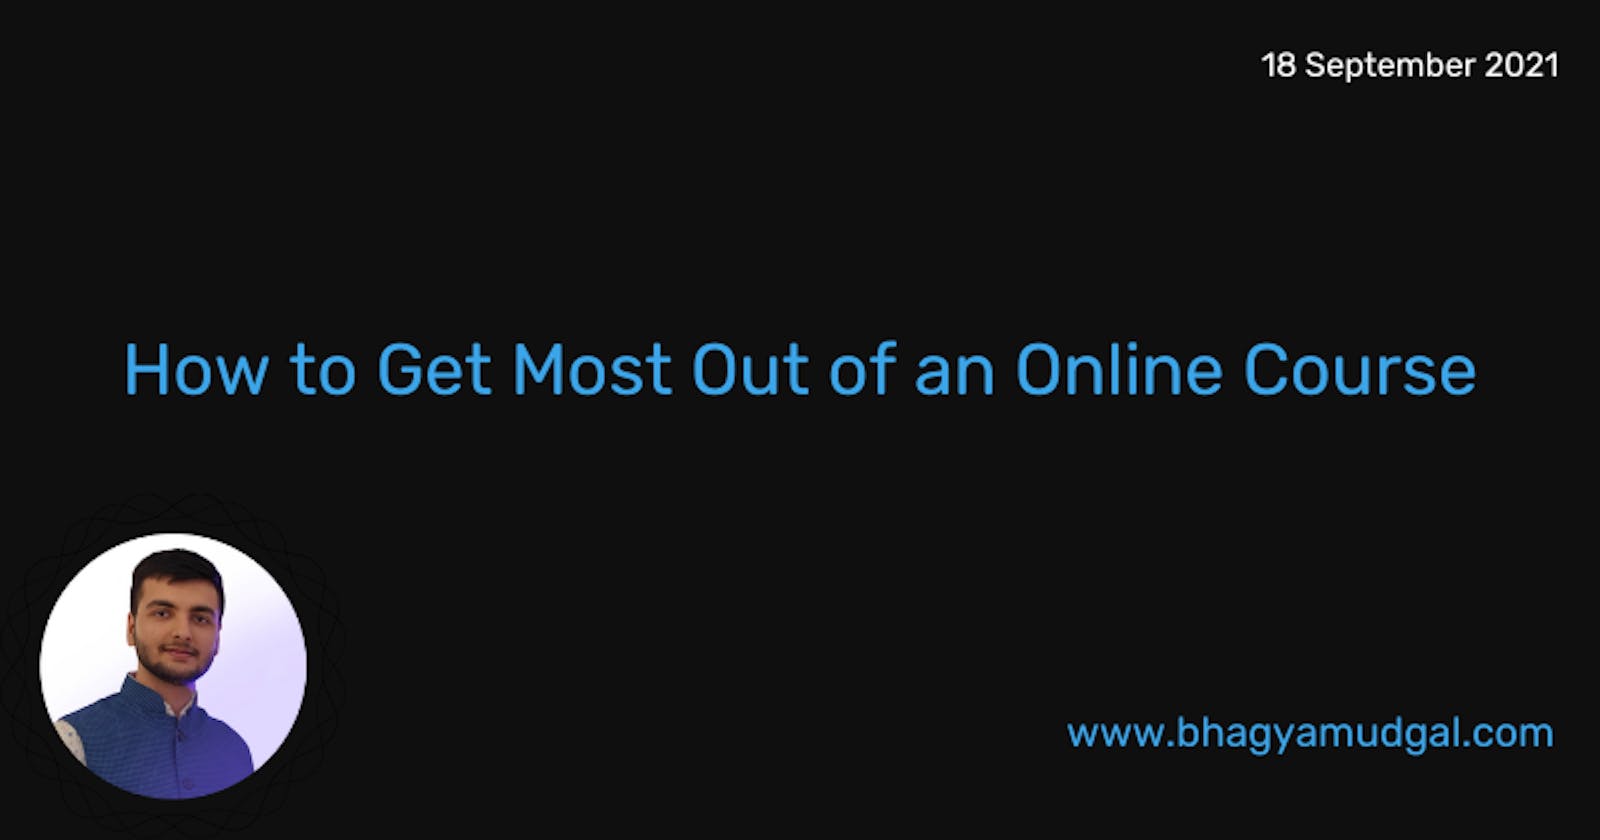 How to Get Most Out of an Online Course